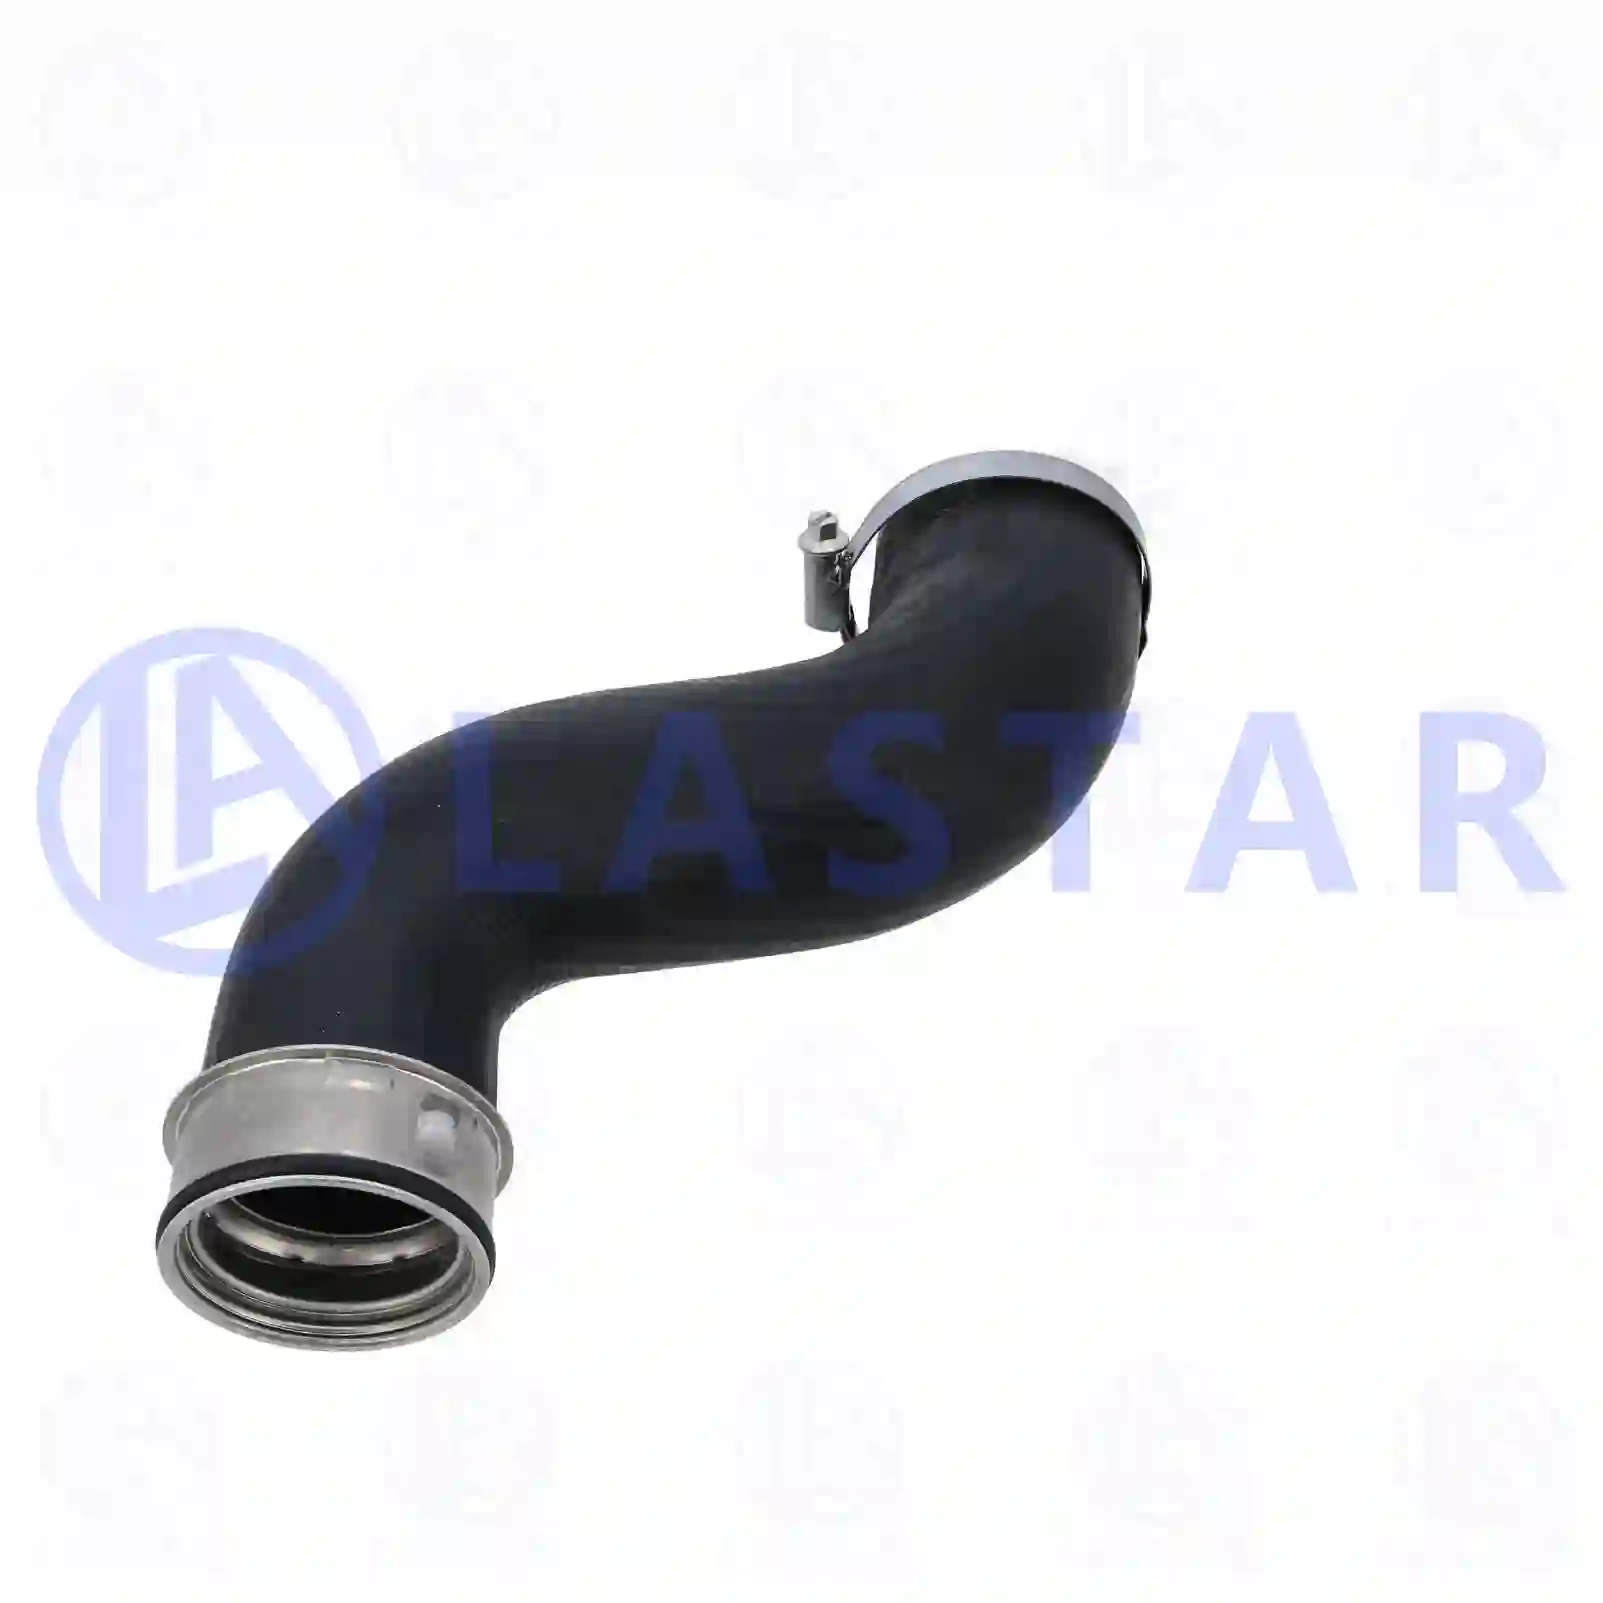 Charge air hose, 77708404, 9065281182 ||  77708404 Lastar Spare Part | Truck Spare Parts, Auotomotive Spare Parts Charge air hose, 77708404, 9065281182 ||  77708404 Lastar Spare Part | Truck Spare Parts, Auotomotive Spare Parts